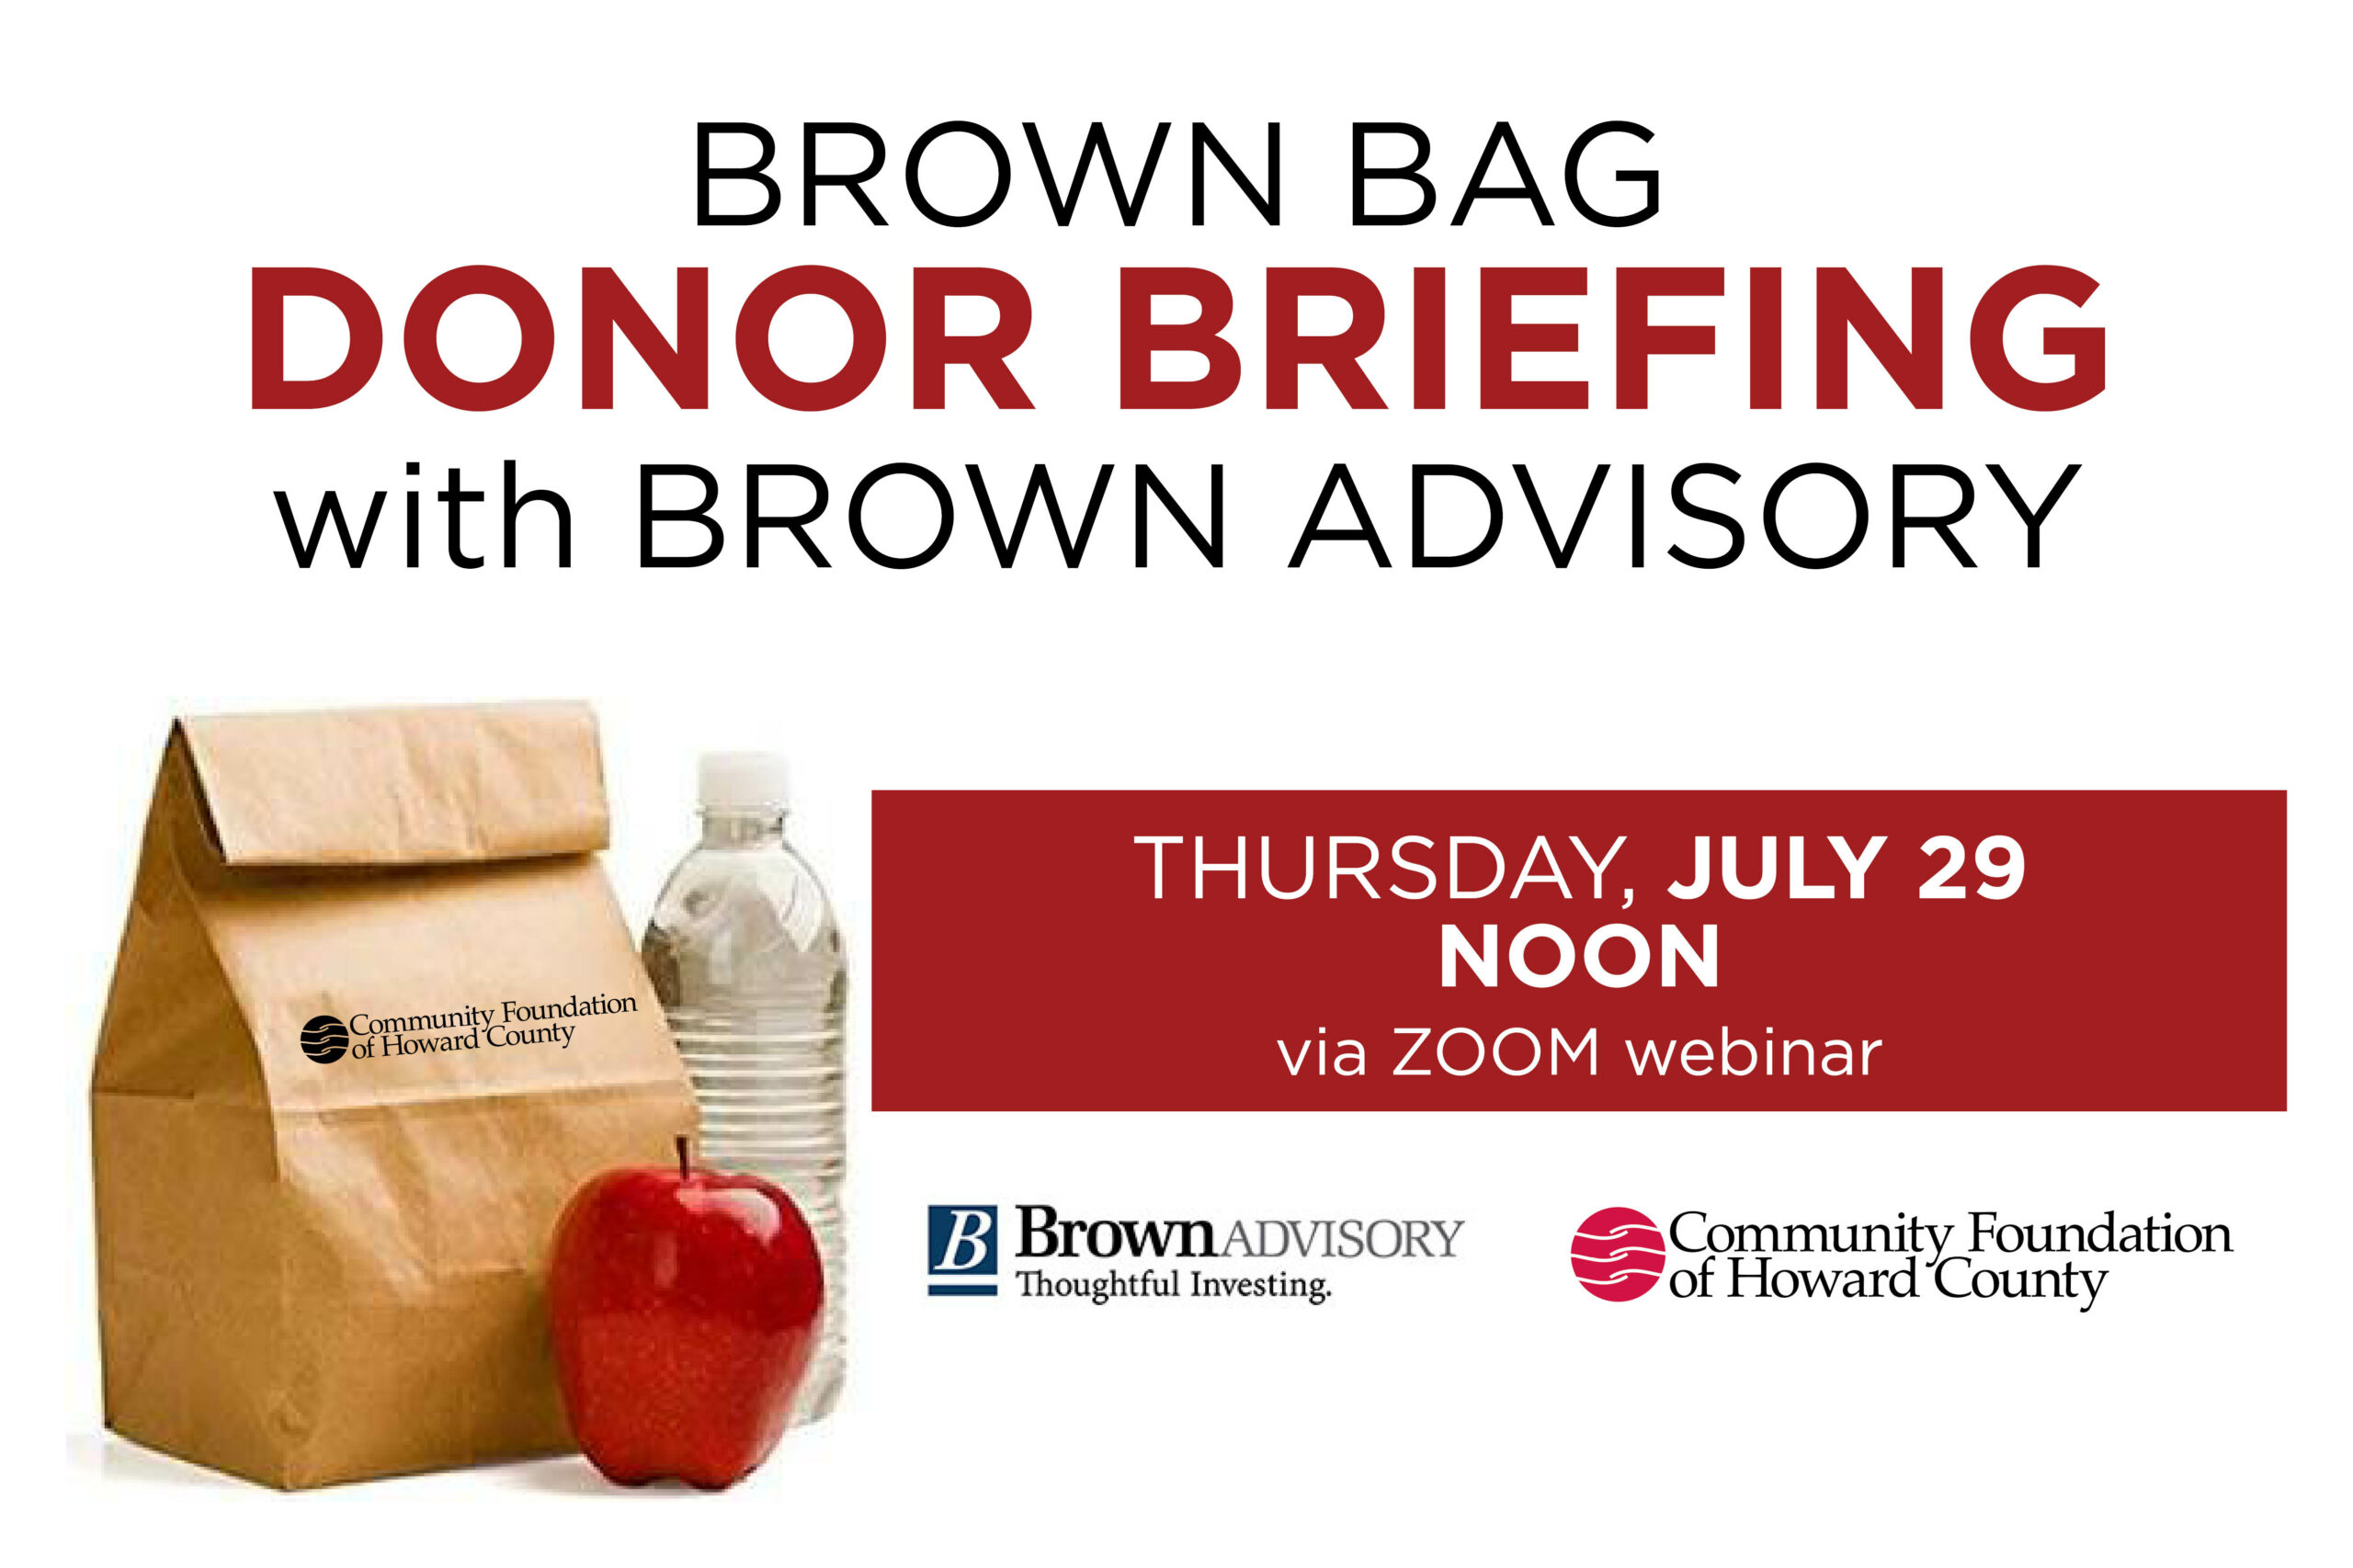 Donor Briefing with Brown Advisory